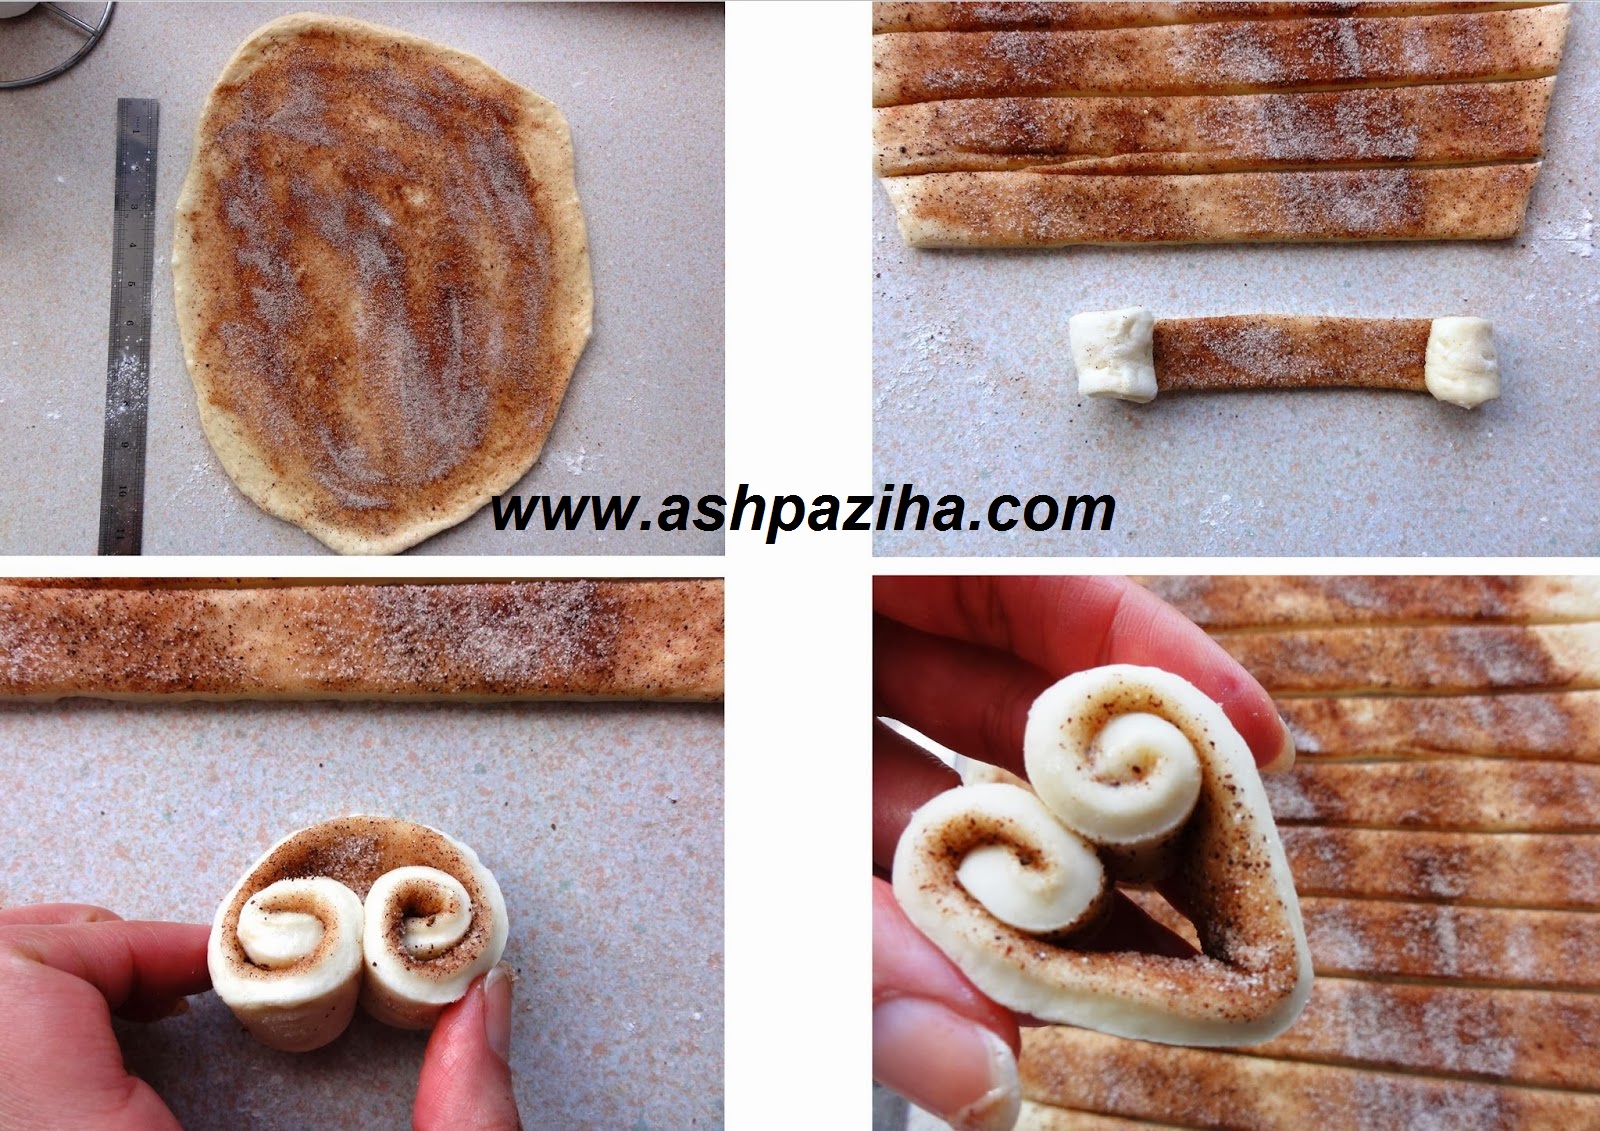 Recipes - cooking - rolls - cinnamon - heart - shaped - teaching - image (2)